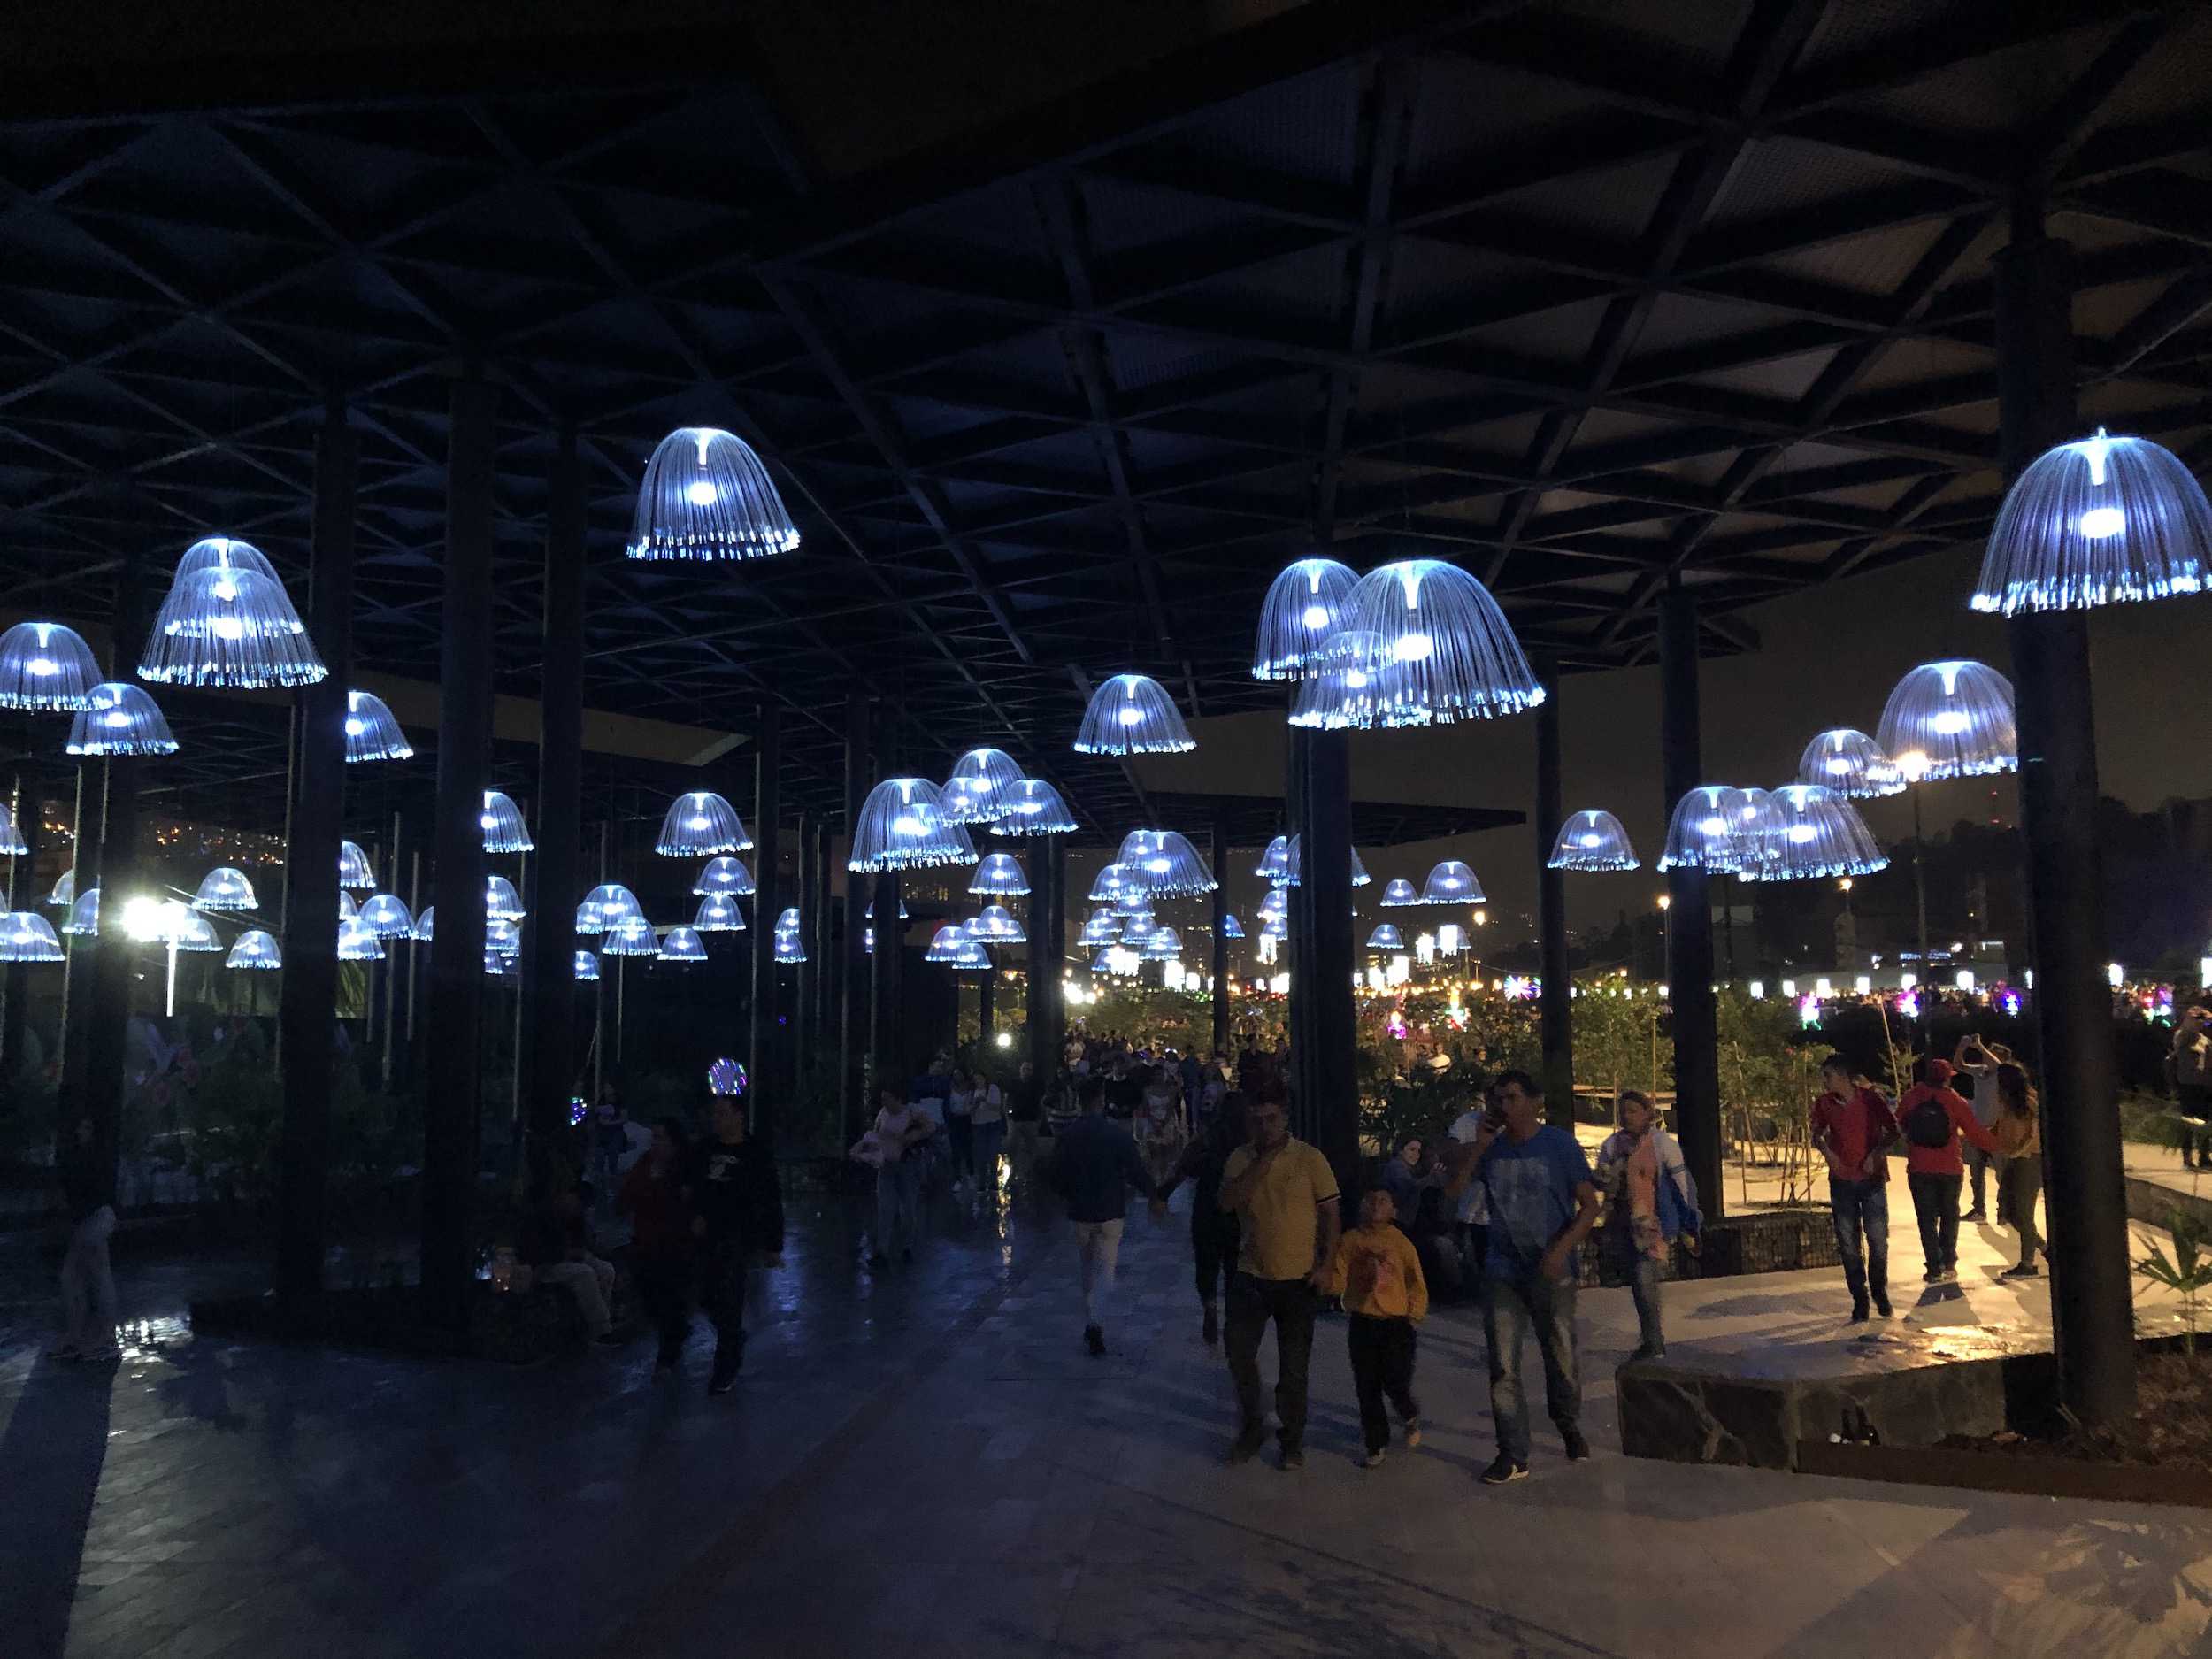 Some of the lights on display at the park at Medellín River Parks in Medellín, Antioquia, Colombia